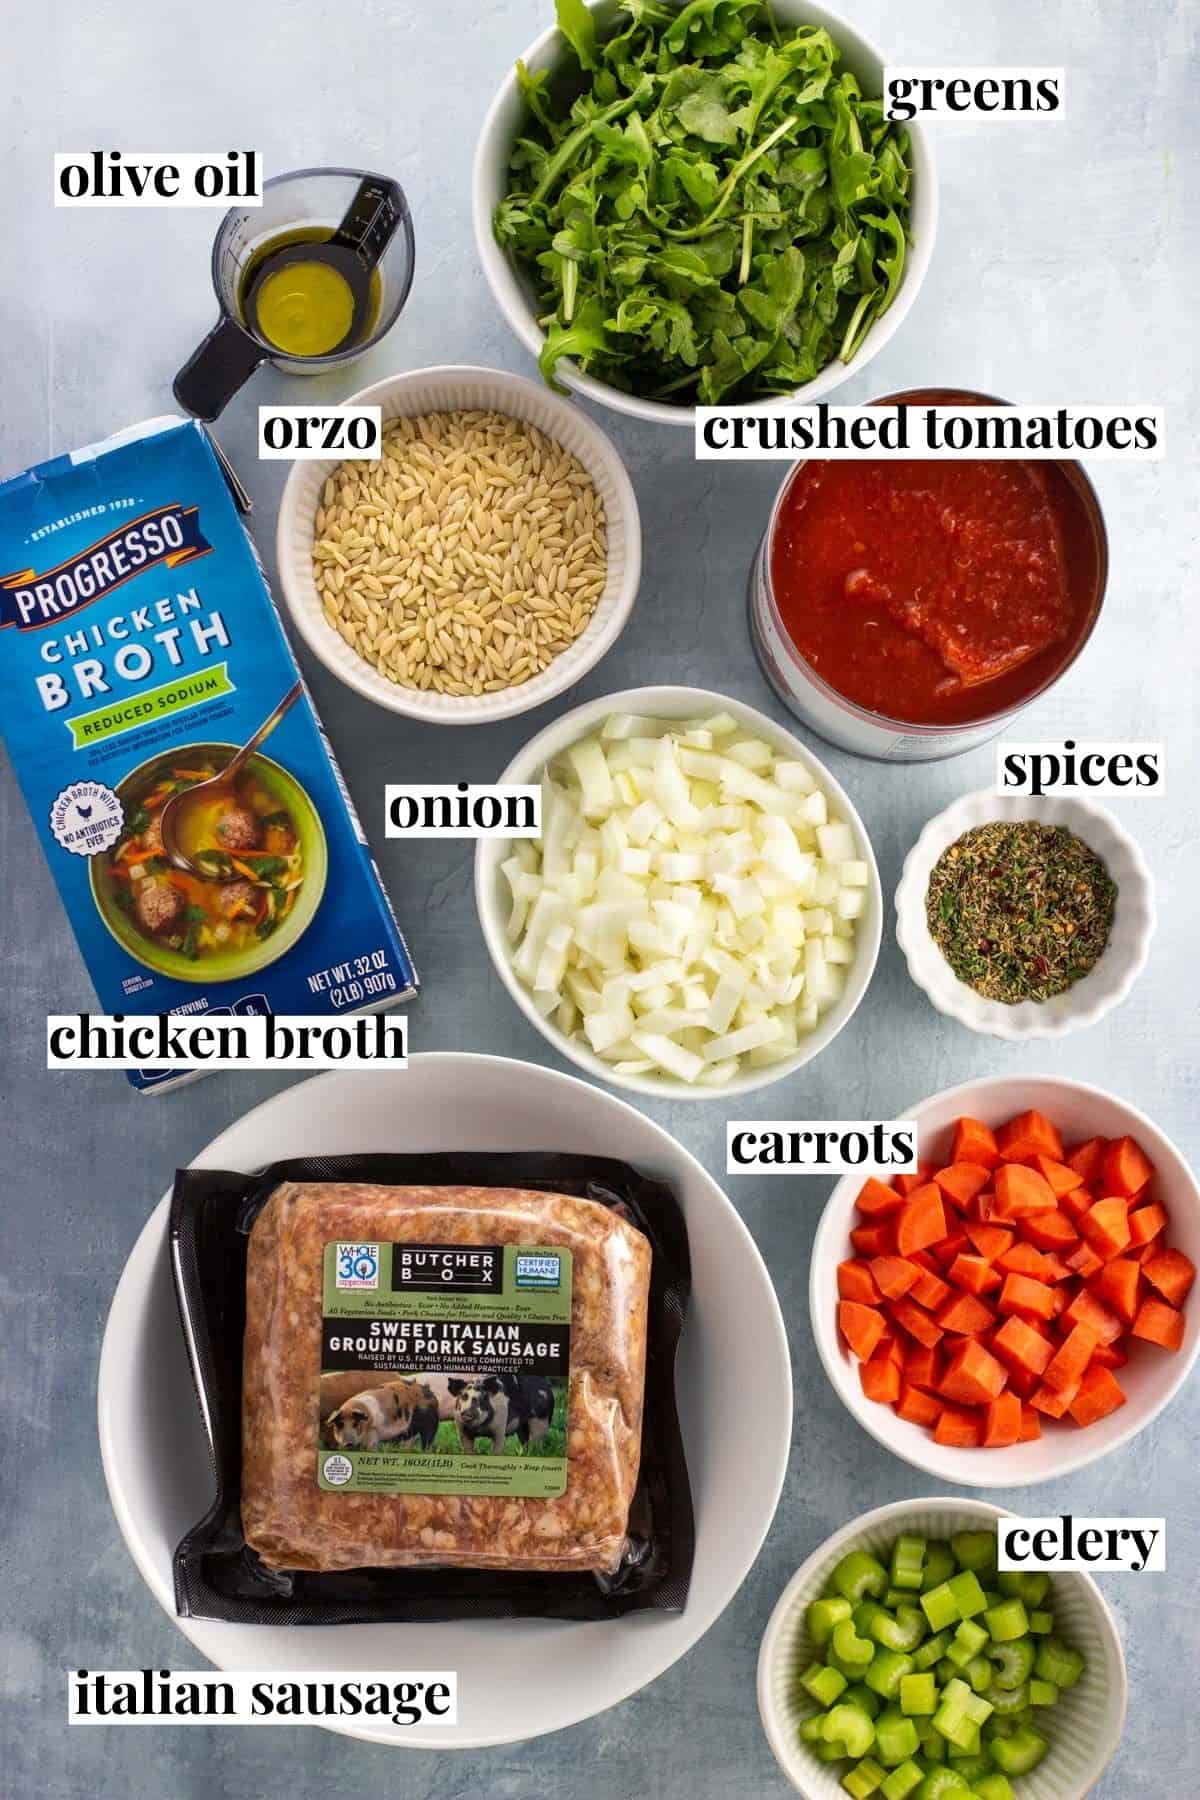 Labeled Italian sausage soup ingredients in separate containers.